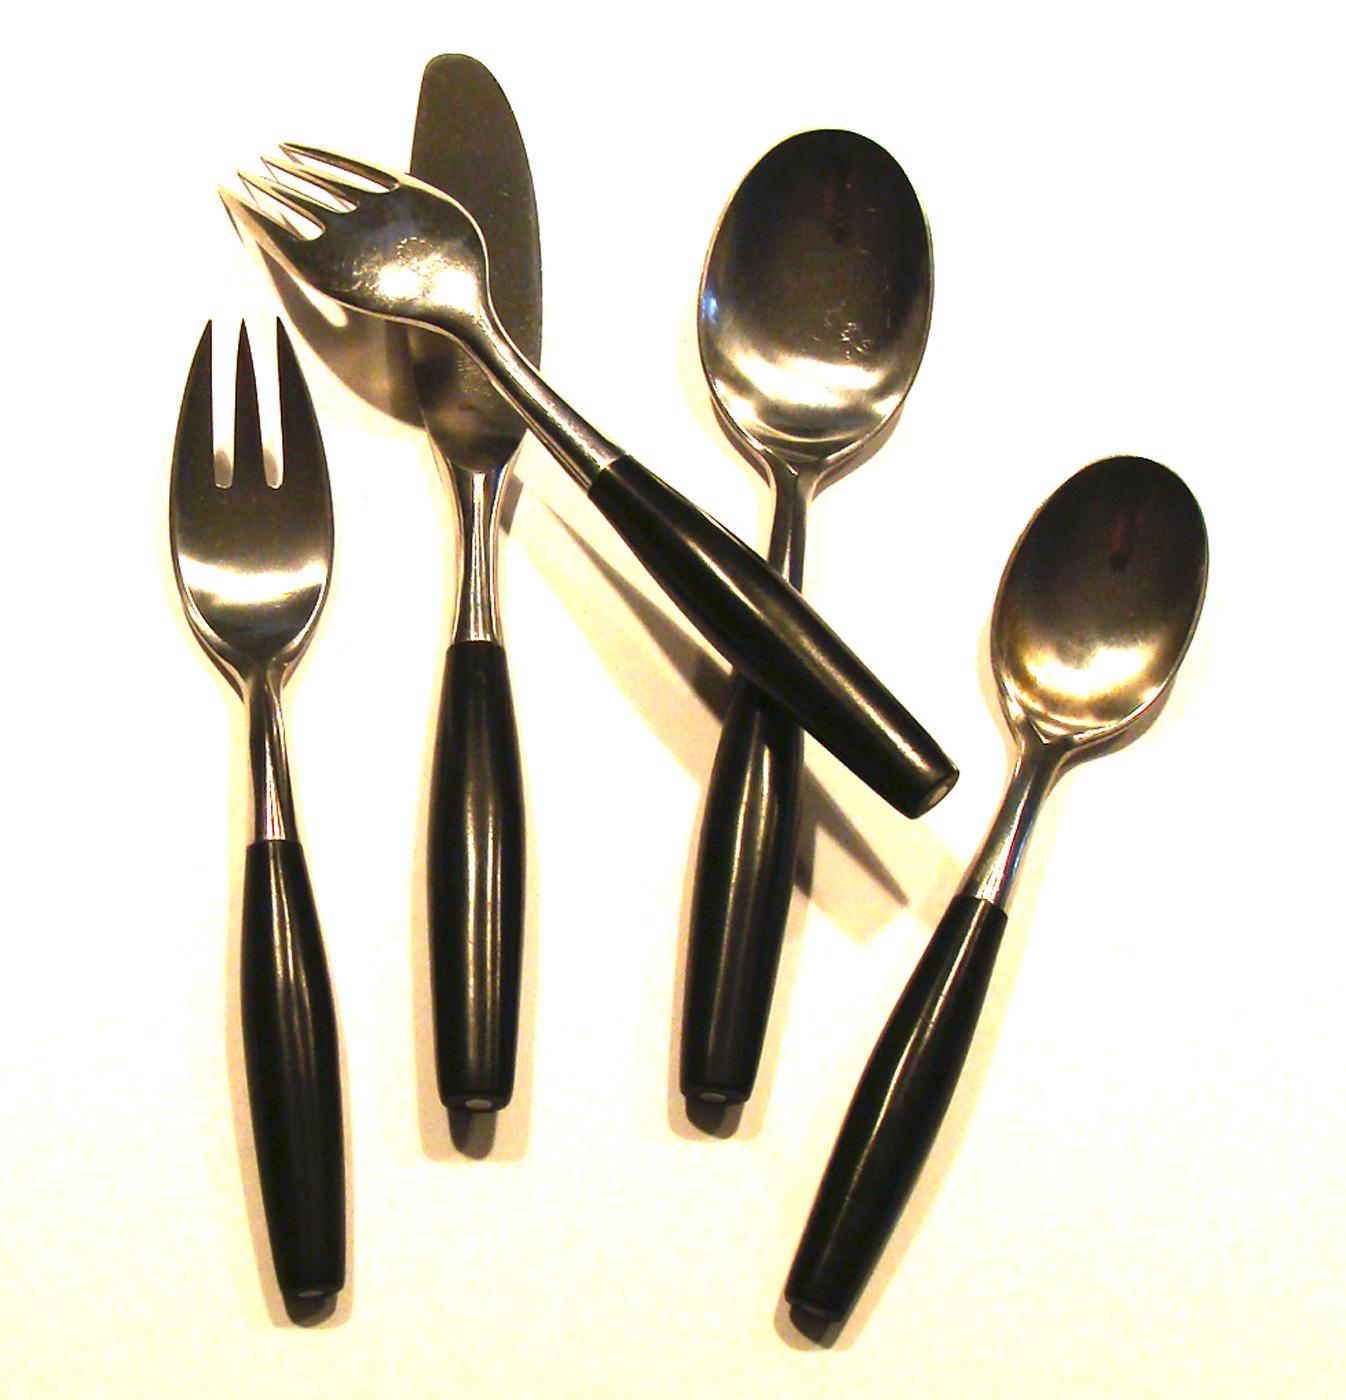 Service for four. (More available). Beautiful vintage five-piece place setting of Kongo flatware featuring 
stainless steel with ebony nylon handles (dishwasher safe). Crafted in Germany circa 1958. Showing gentle wear. 
 No damage.
Setting